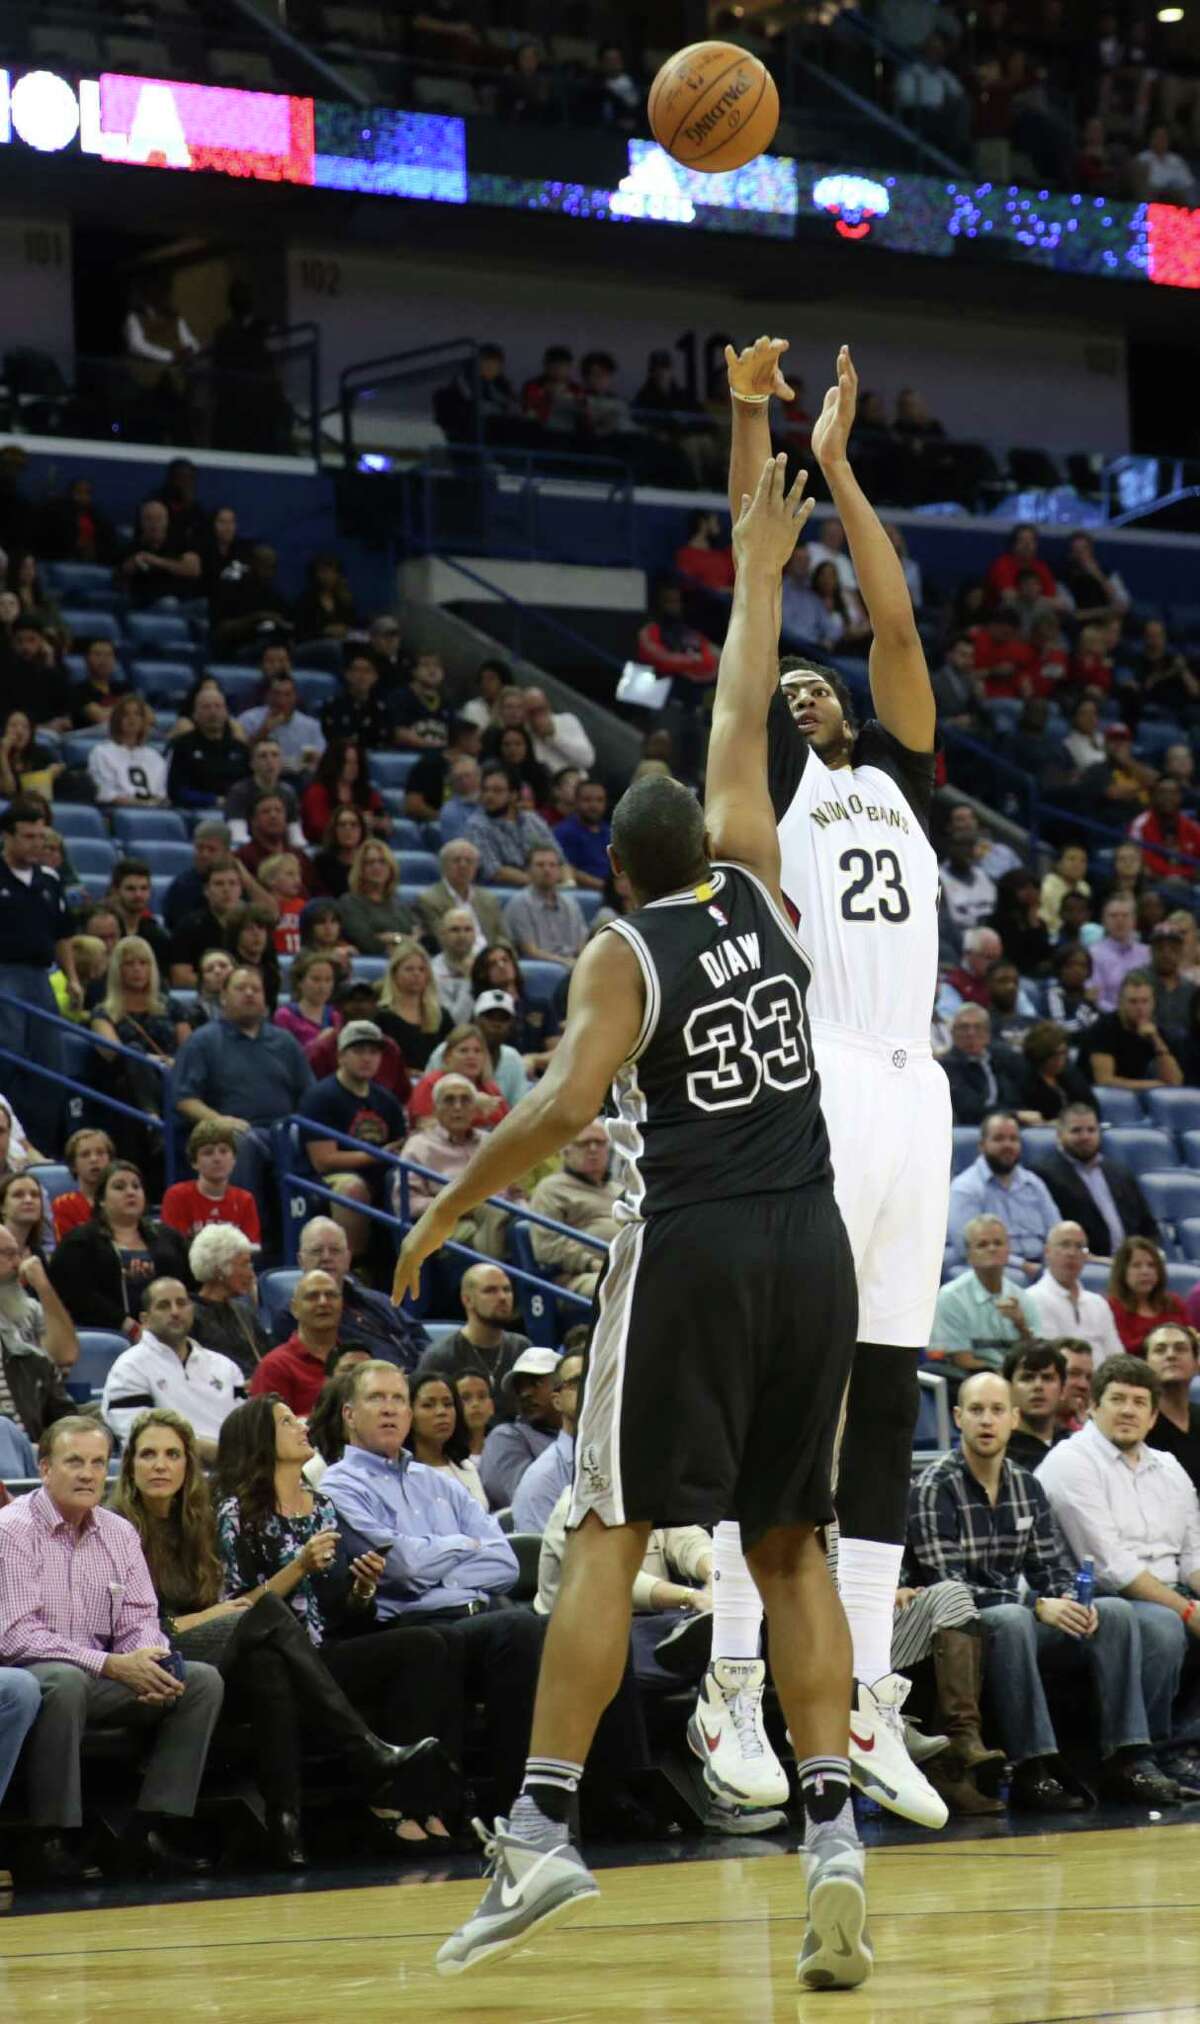 2277 x 3840~~$~~New Orleans Pelicans forward Anthony Davis (23) releases a 3-point shot over San Antonio Spurs center Boris Diaw (33) during the first half of an NBA basketball game in New Orleans, Friday, Nov. 20, 2015.